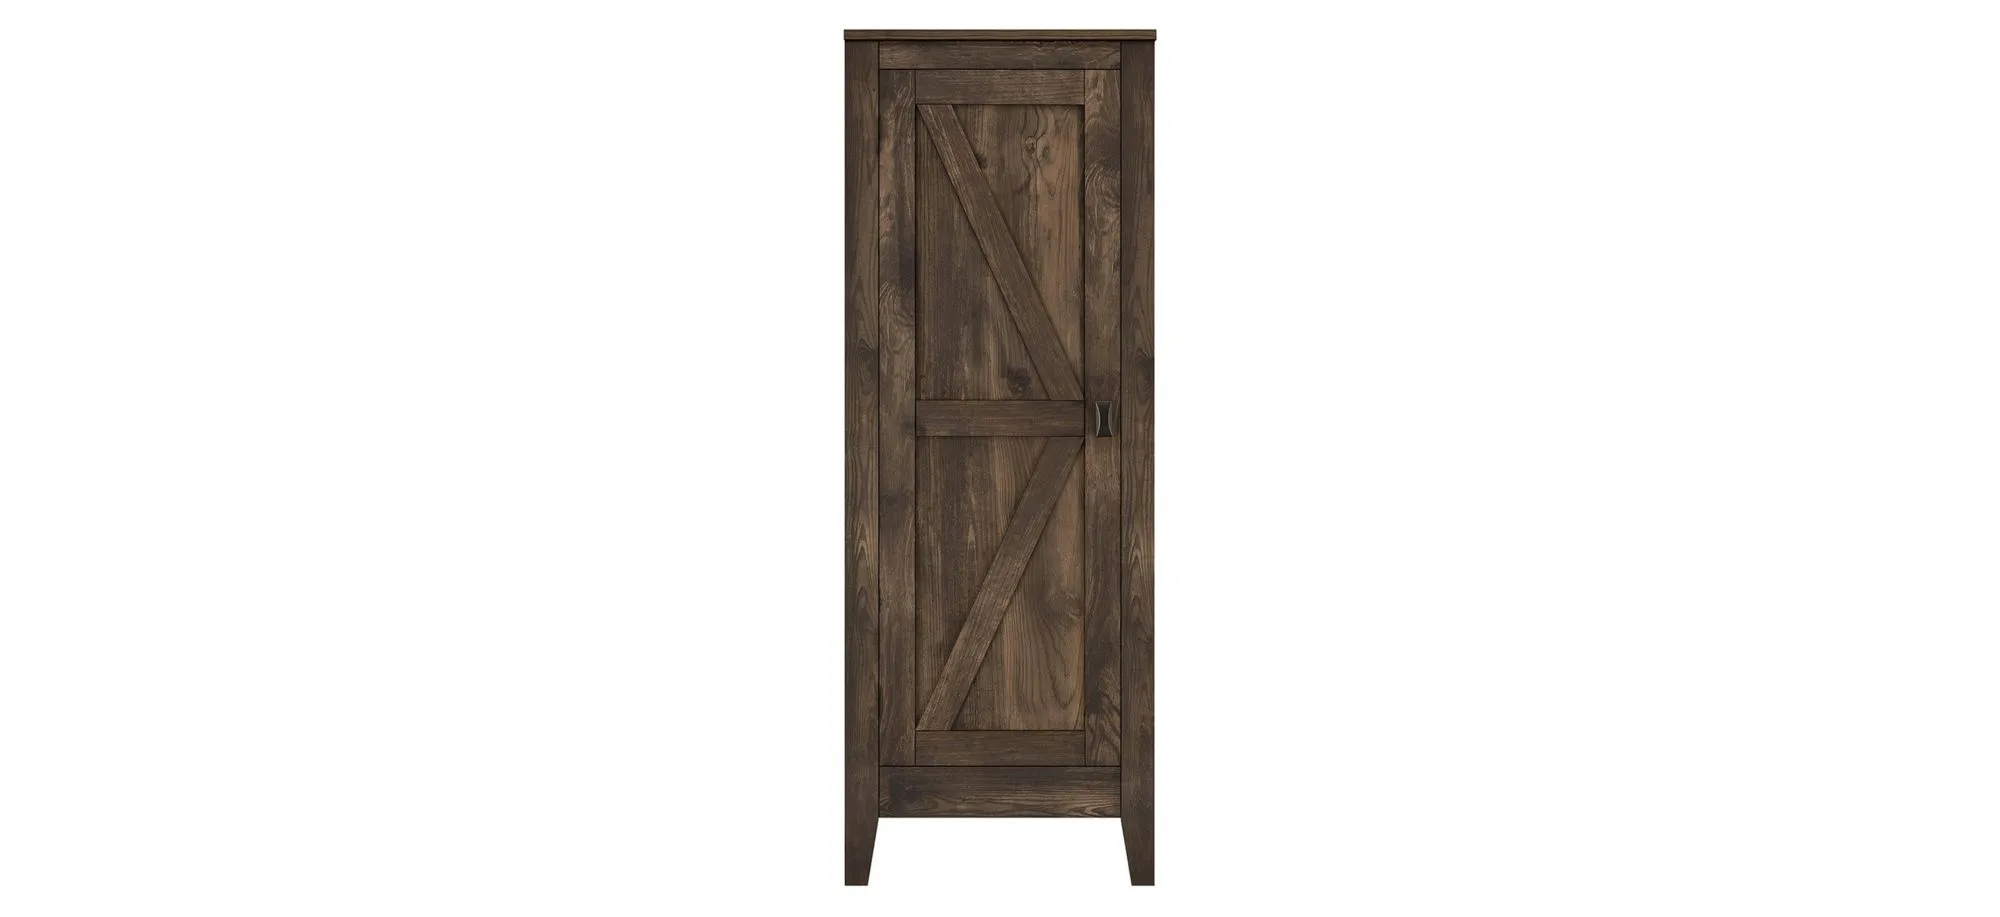 Farmington Pantry Cabinet in Rustic by DOREL HOME FURNISHINGS